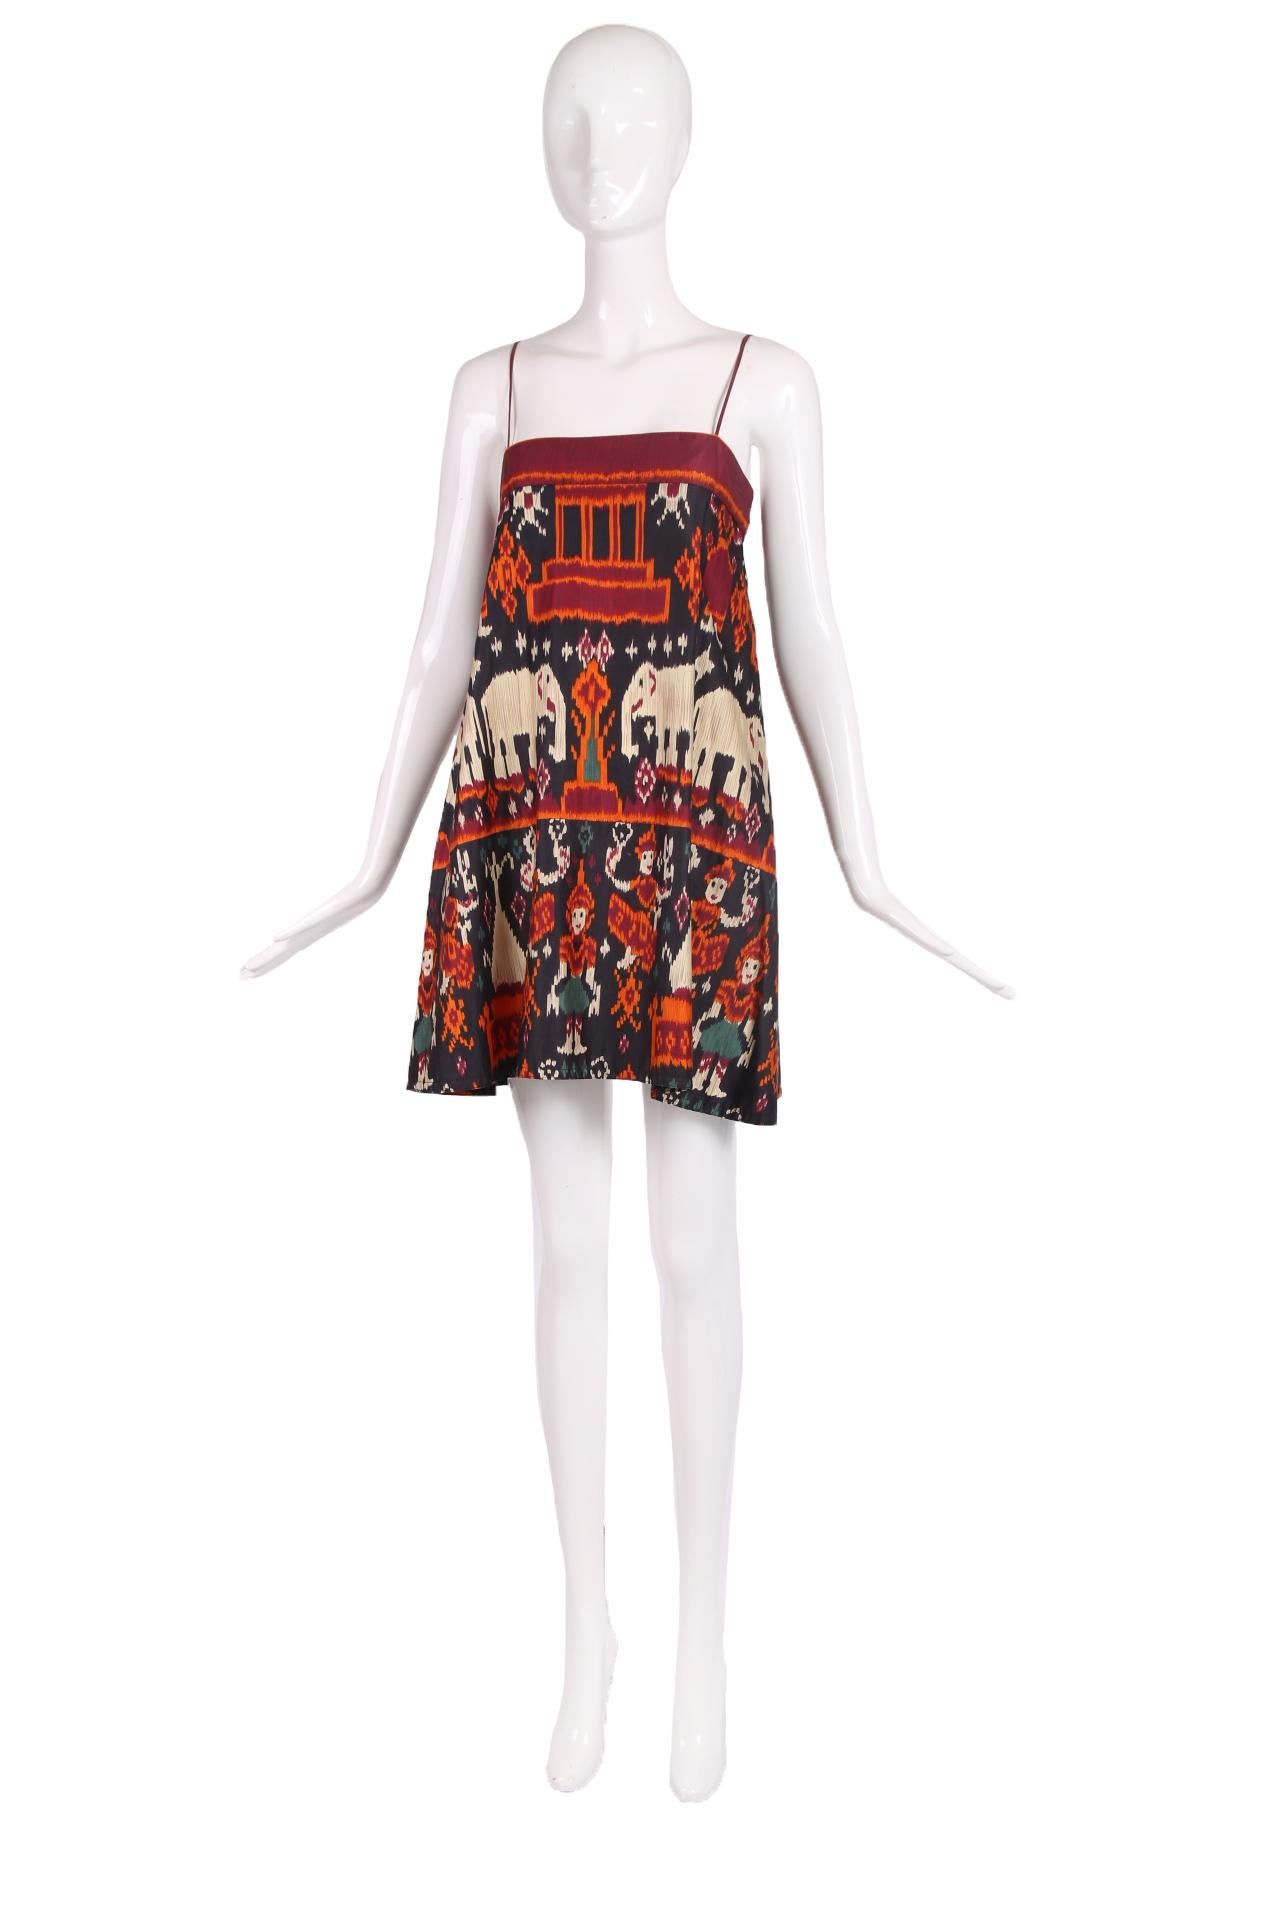 Vintage Anne Klein from the Donna Karan era mini dress w/Ikat-style print featuring elephants and humans wearing hats standing under a temple.Shoulder ties fasten at the back by means of hook and eye closures. Size 4. No fabric tag but feels like